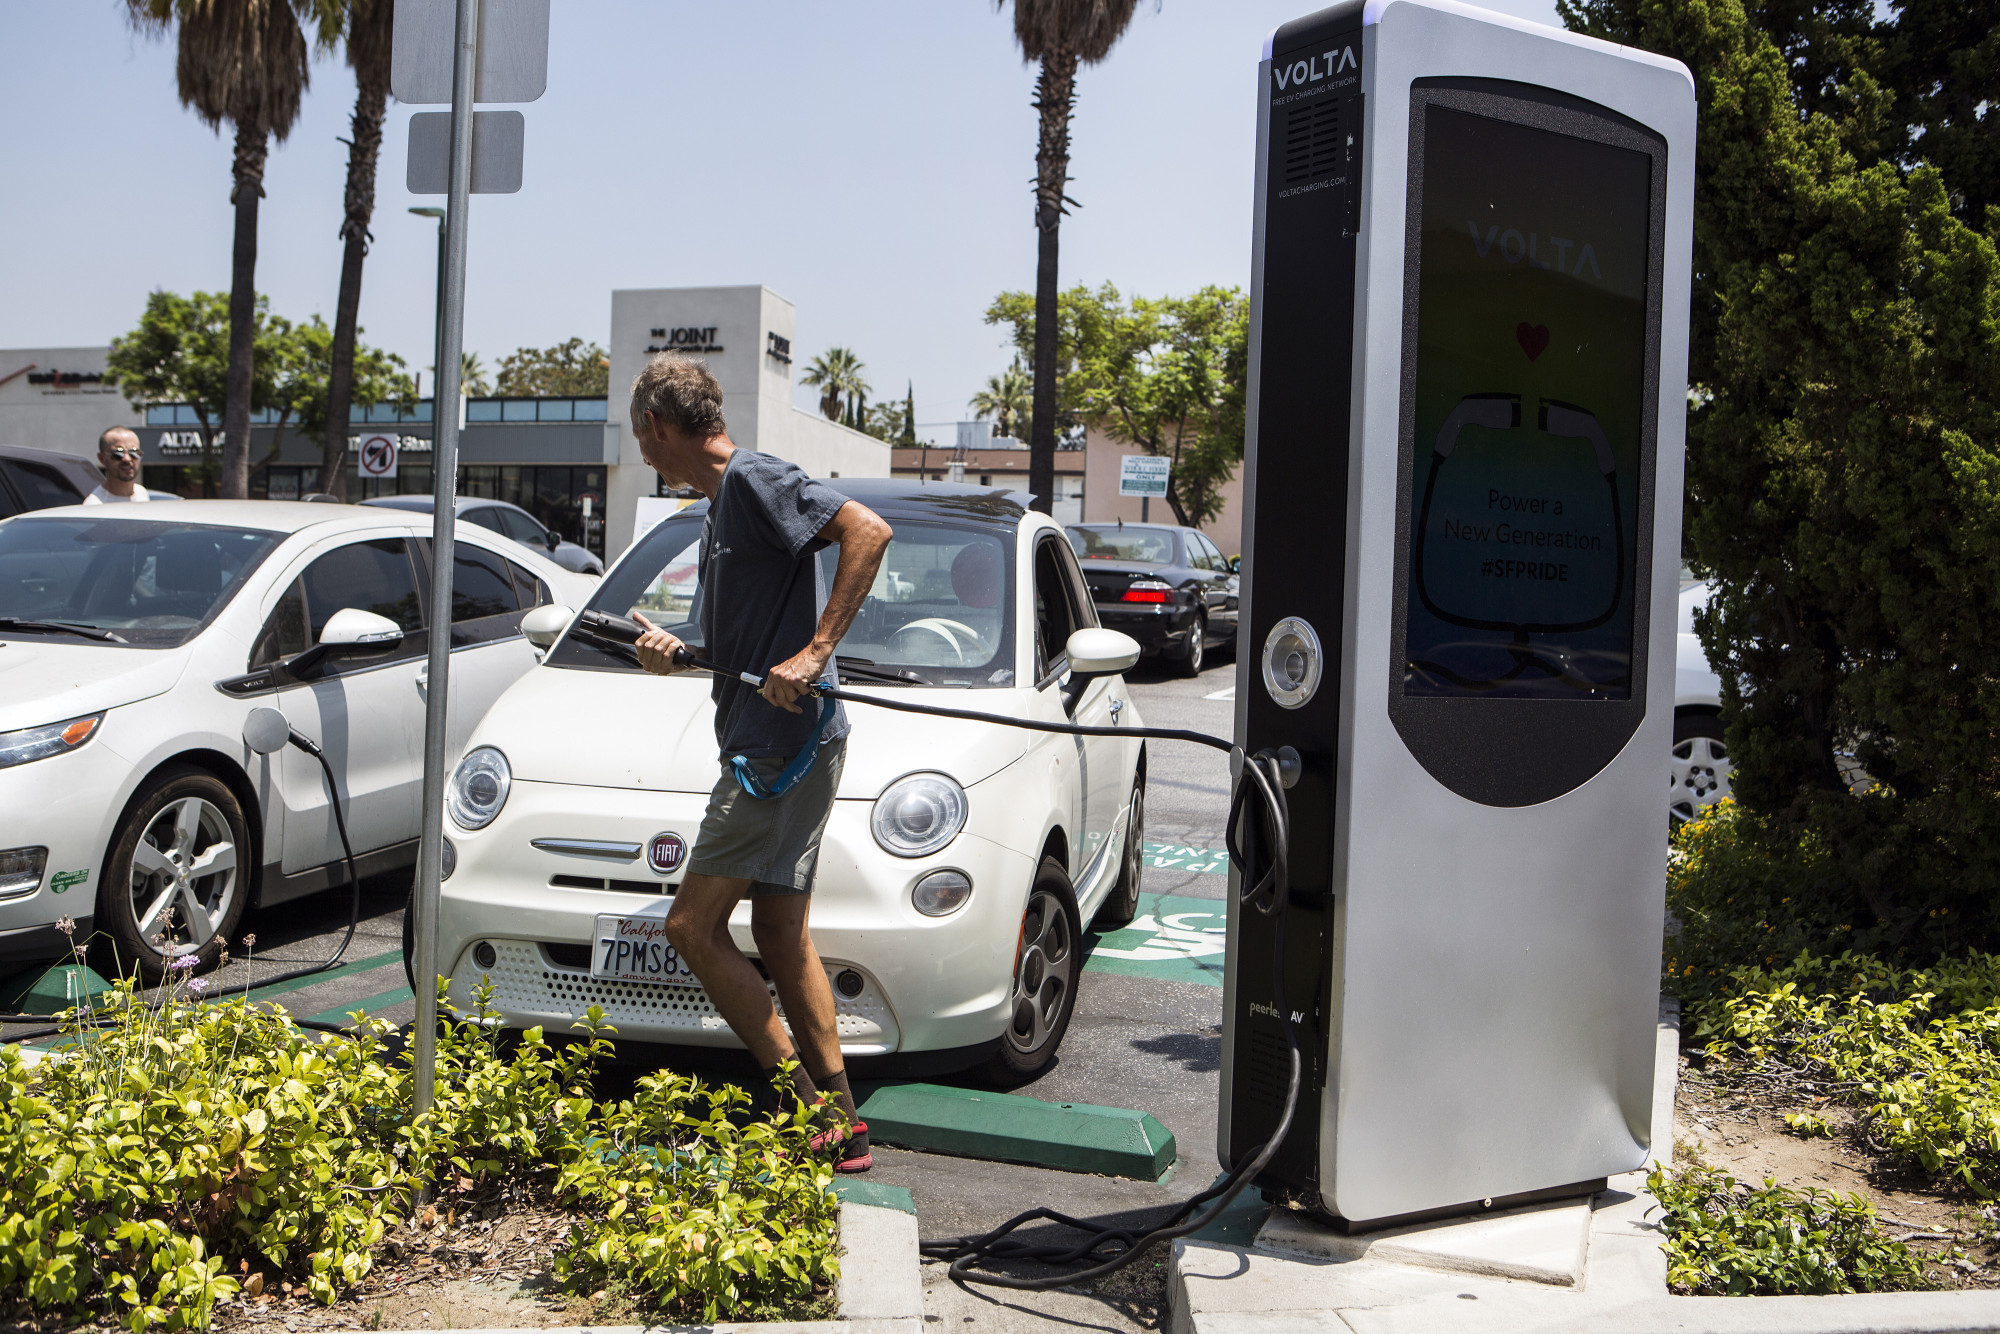 California Mulls an Extra 2,000 Subsidy for Electric Autos Bloomberg